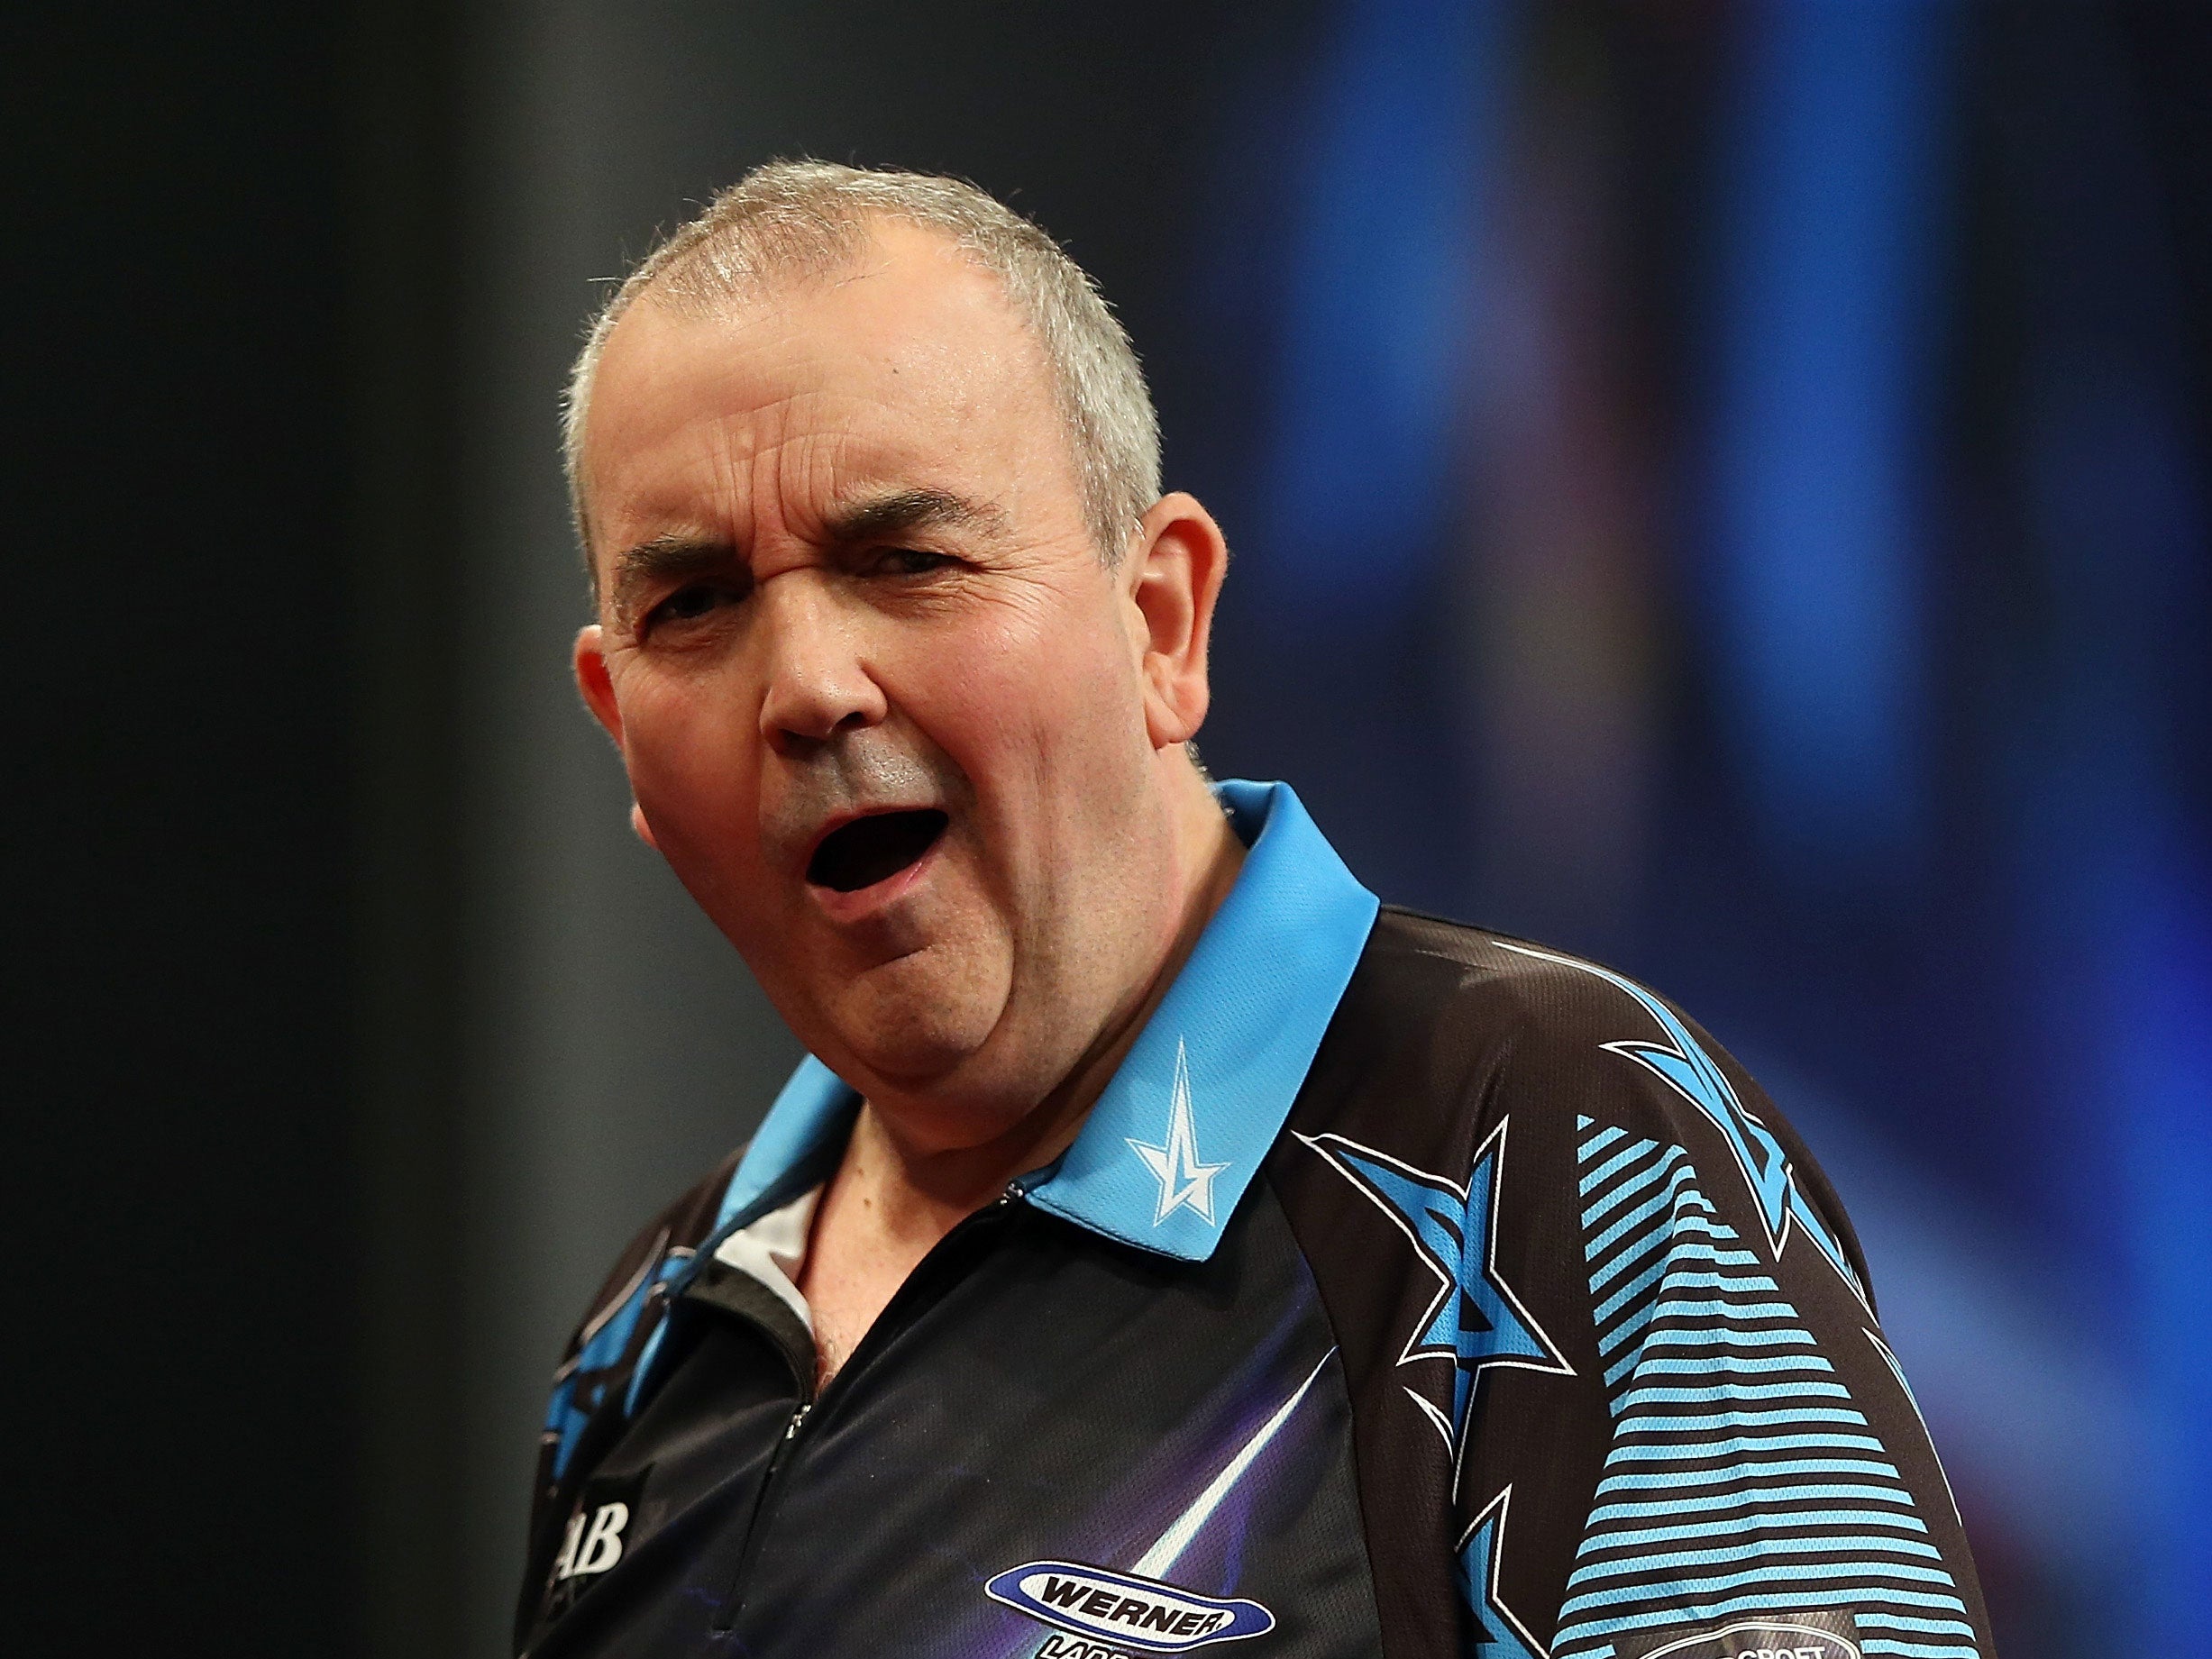 The 16-time world champion Phil Taylor